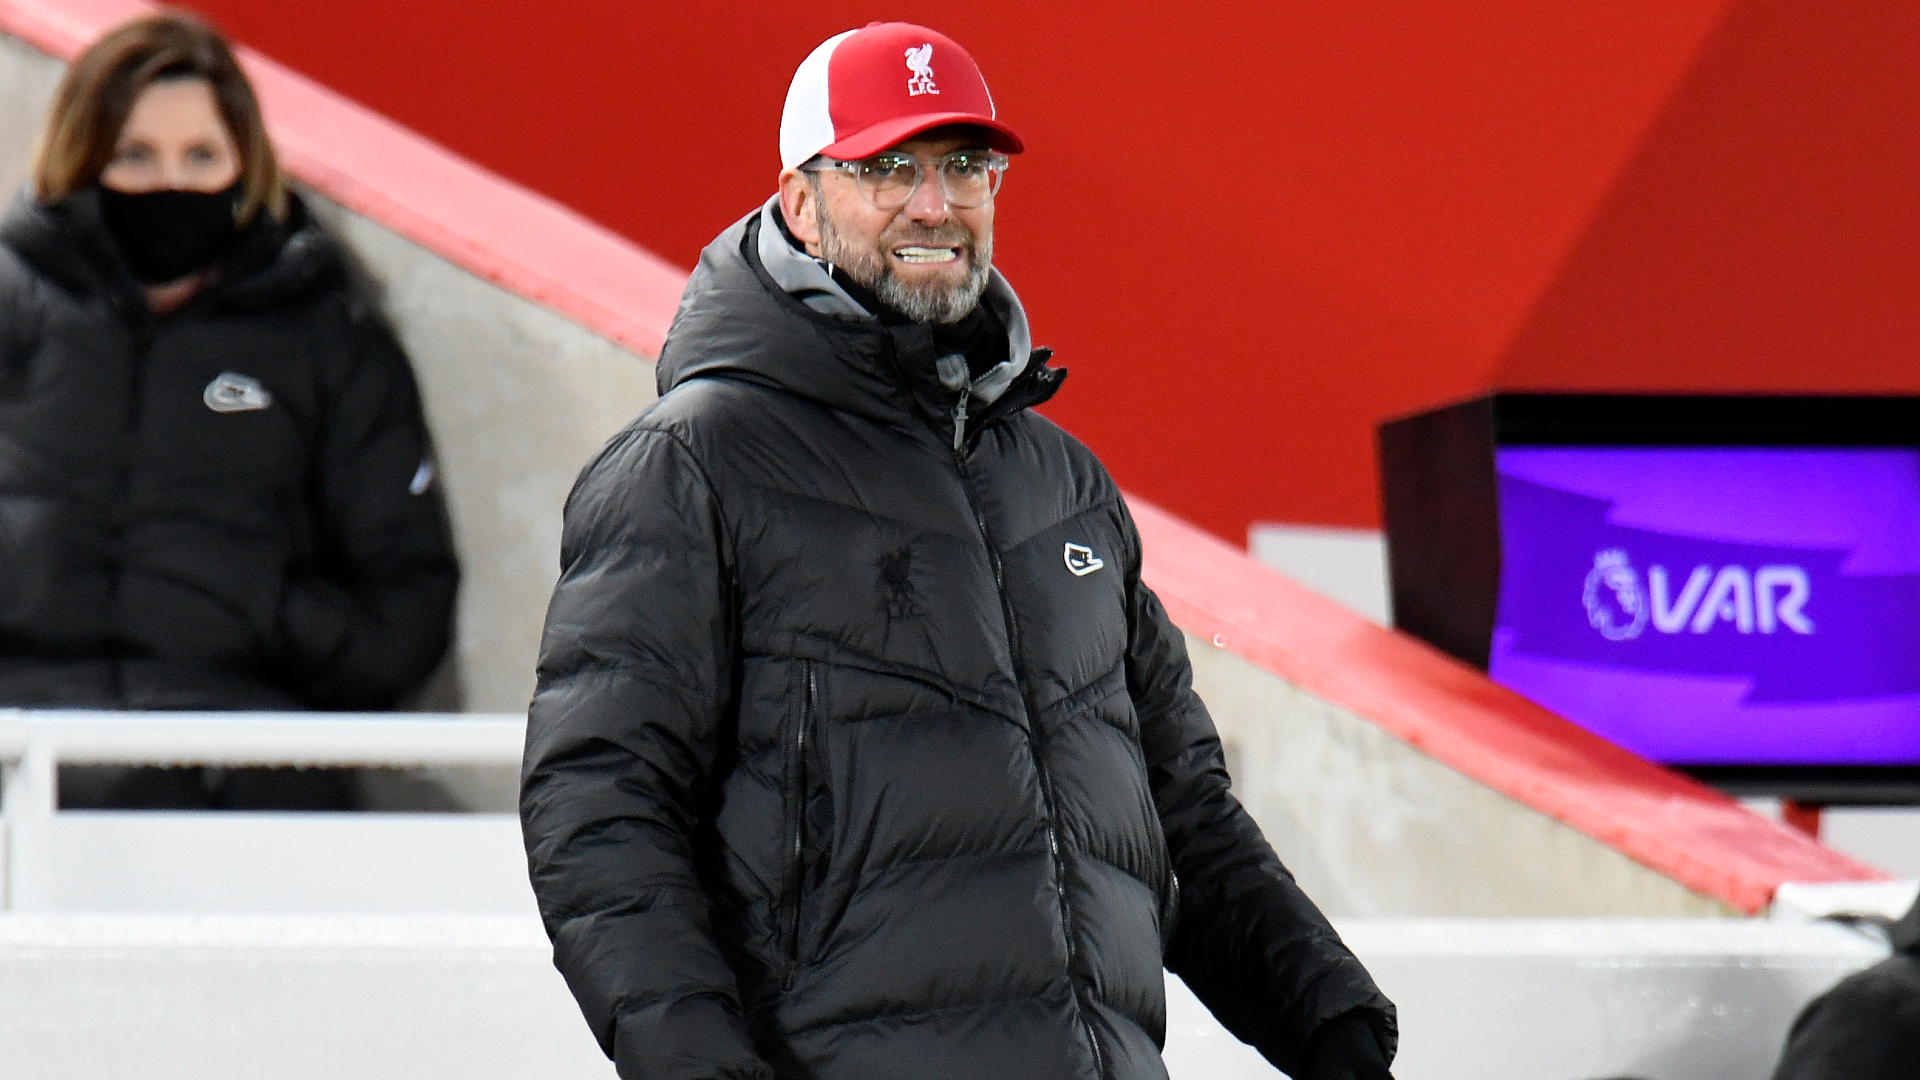 Liverpool manager Jurgen Klopp said discussing the title race was "silly".